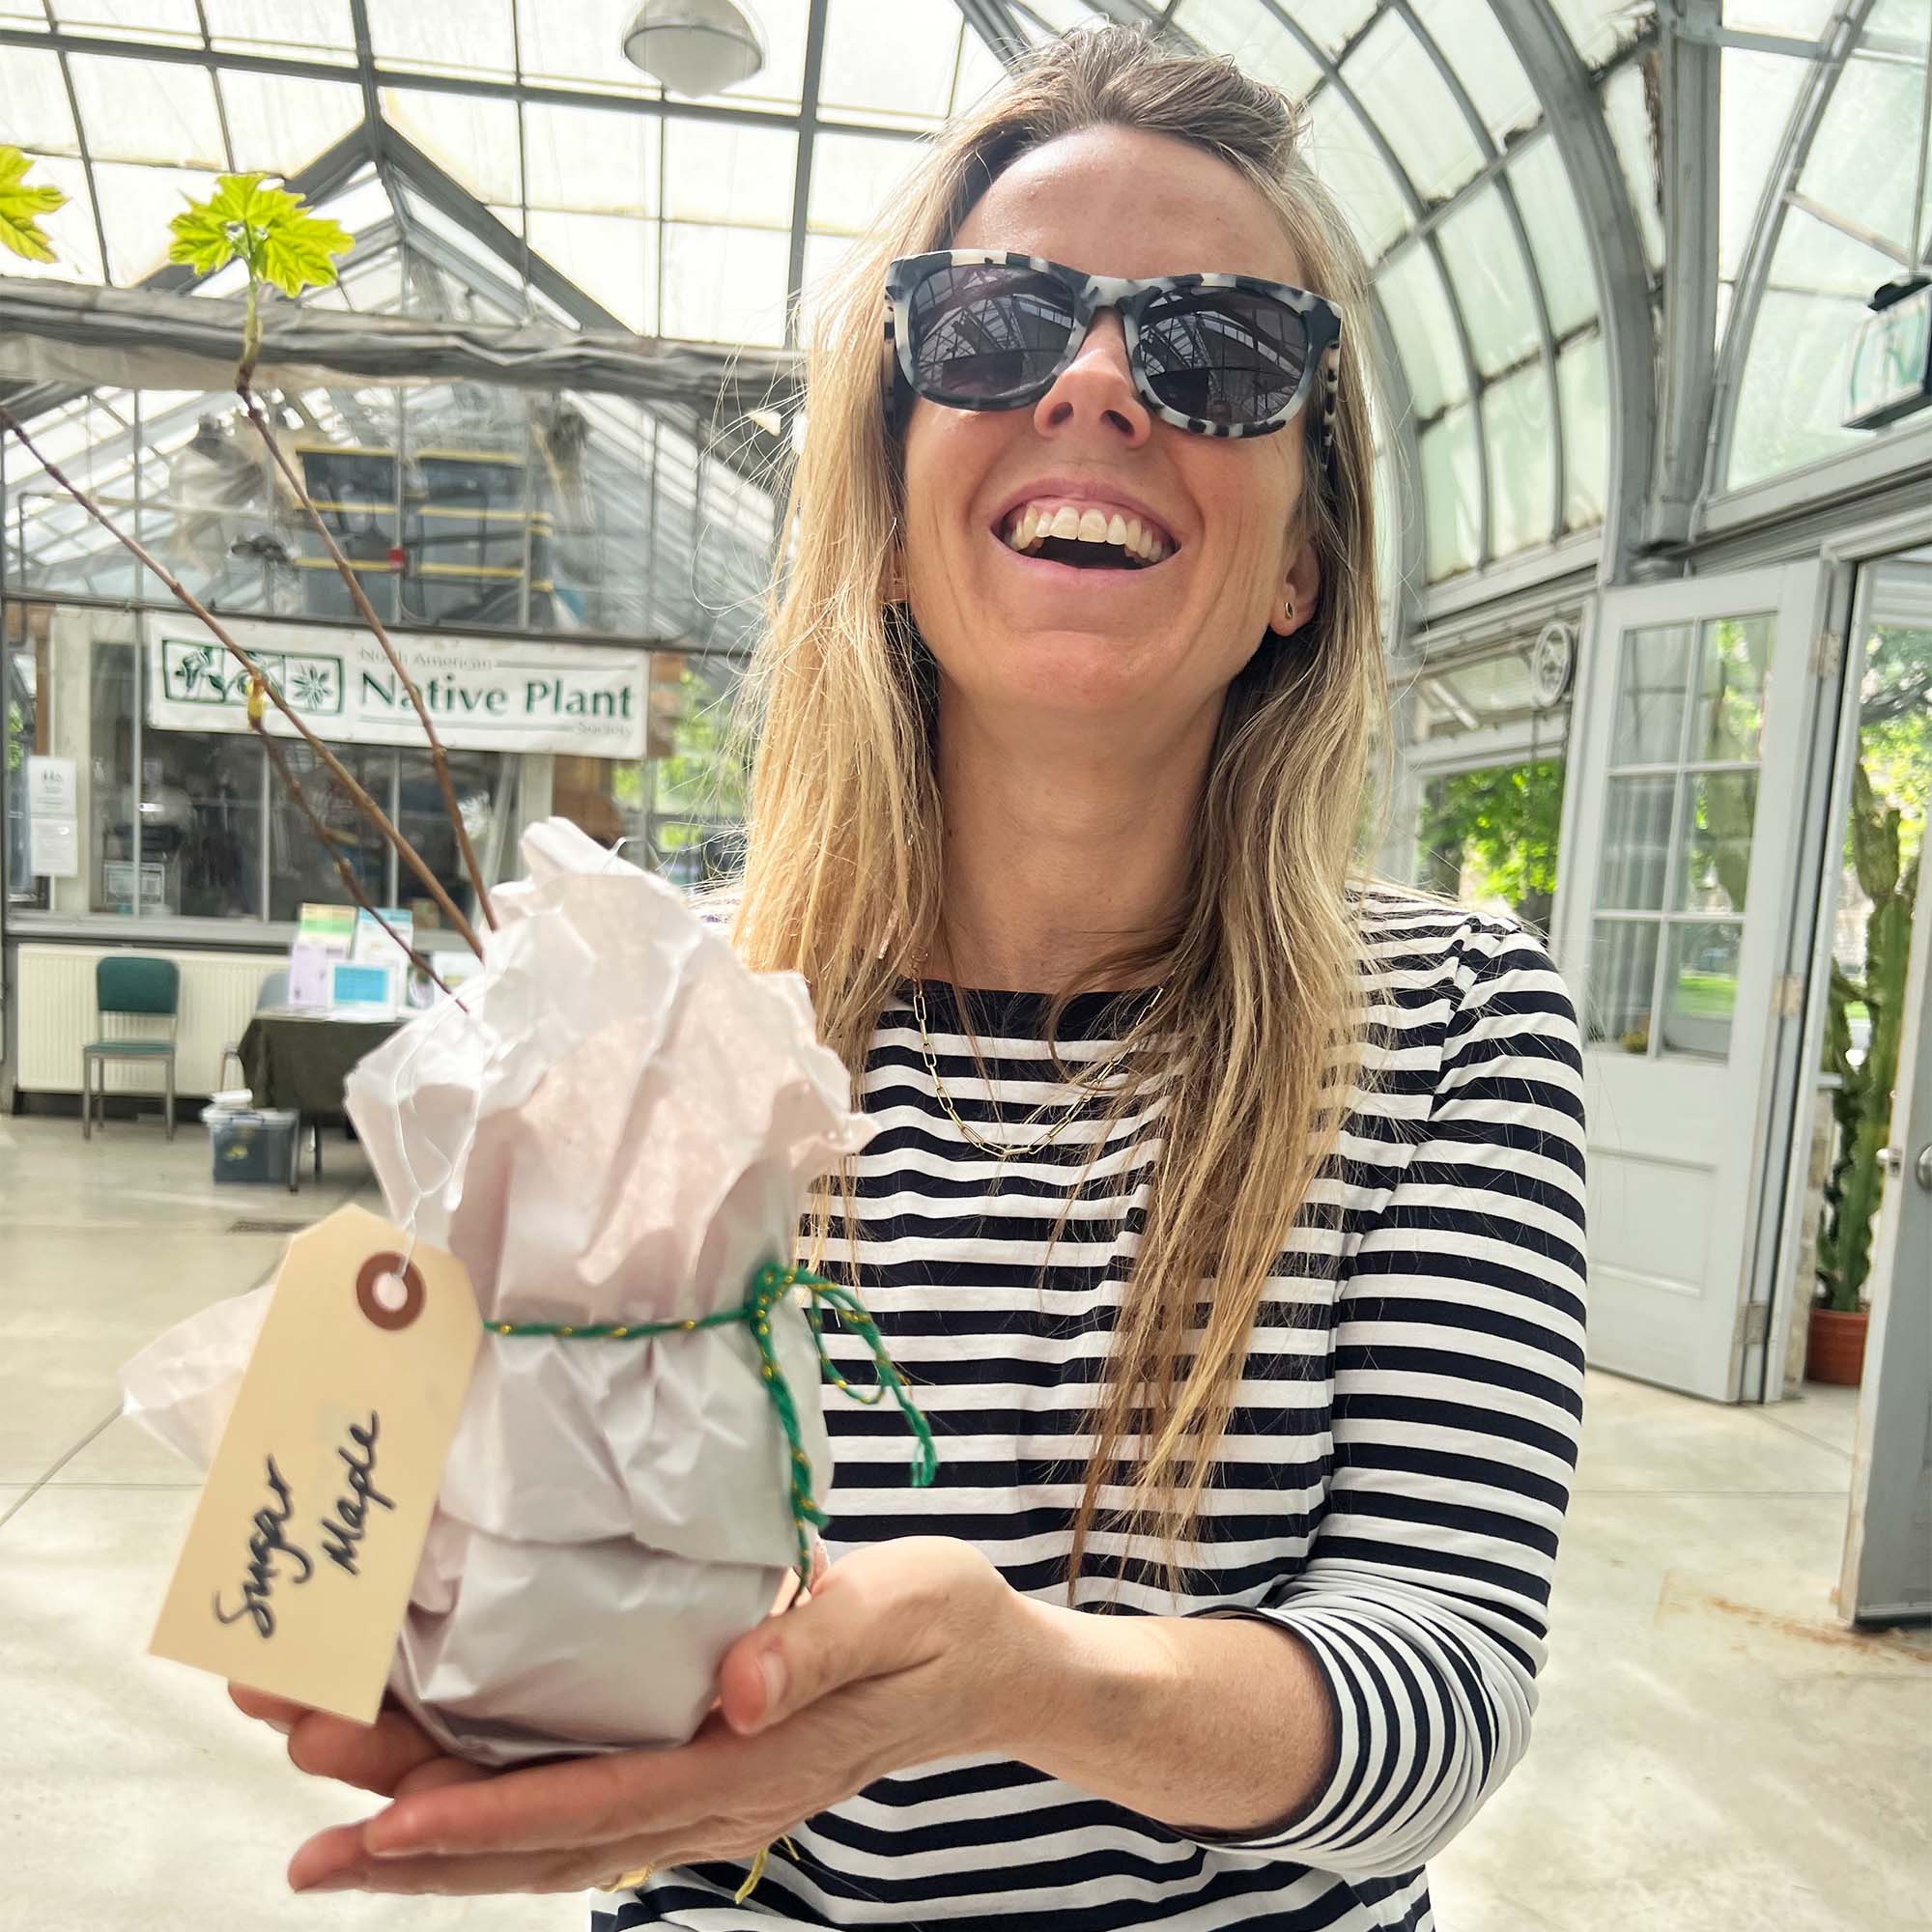 A smiling person in sunglasses holding a tree seedling at a nursery